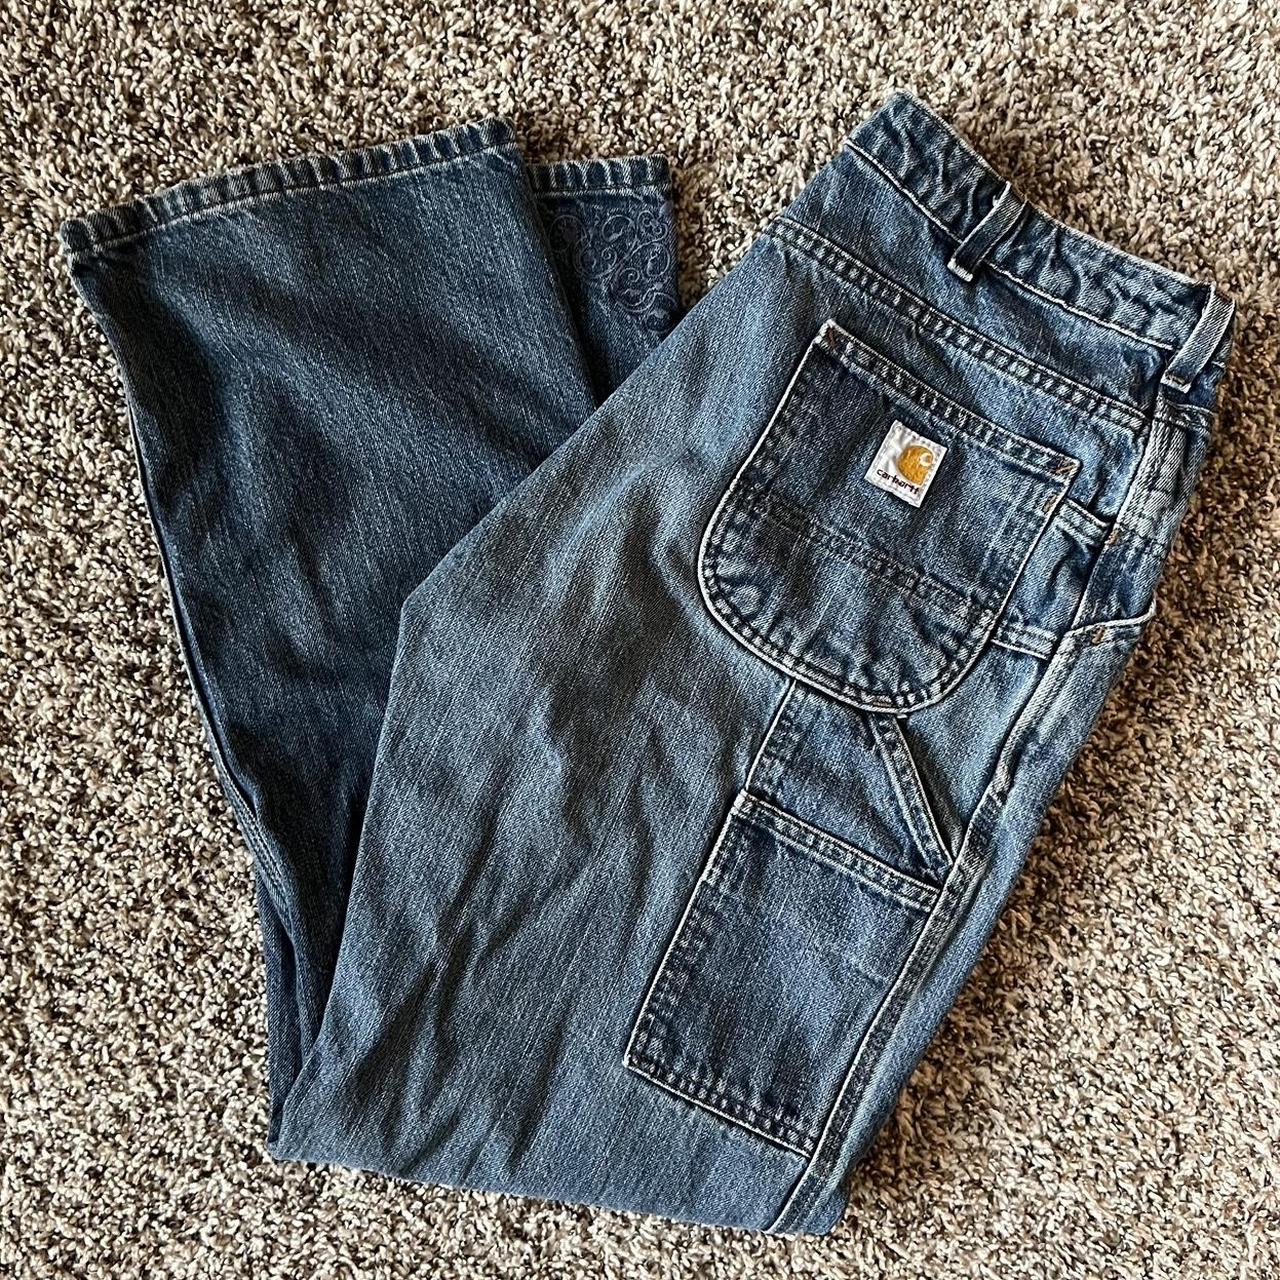 Carhartt Vintage Pants (RARE) These pants are... - Depop